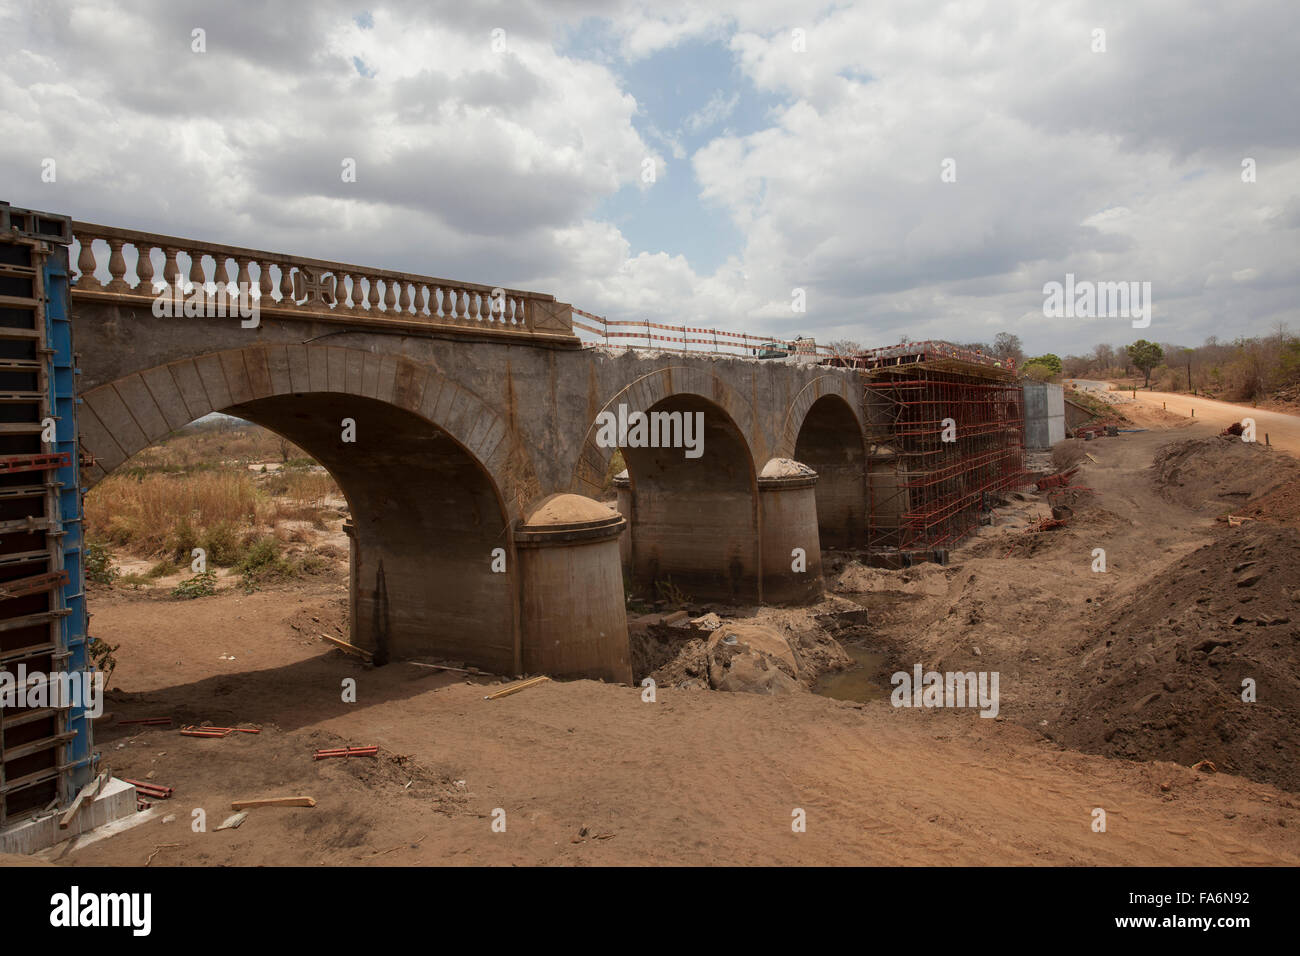 Construction workers rehabilitate an aging bridge along the Namialo to Rio Lurio Road in Northern Mozambique, SE Africa. Stock Photo